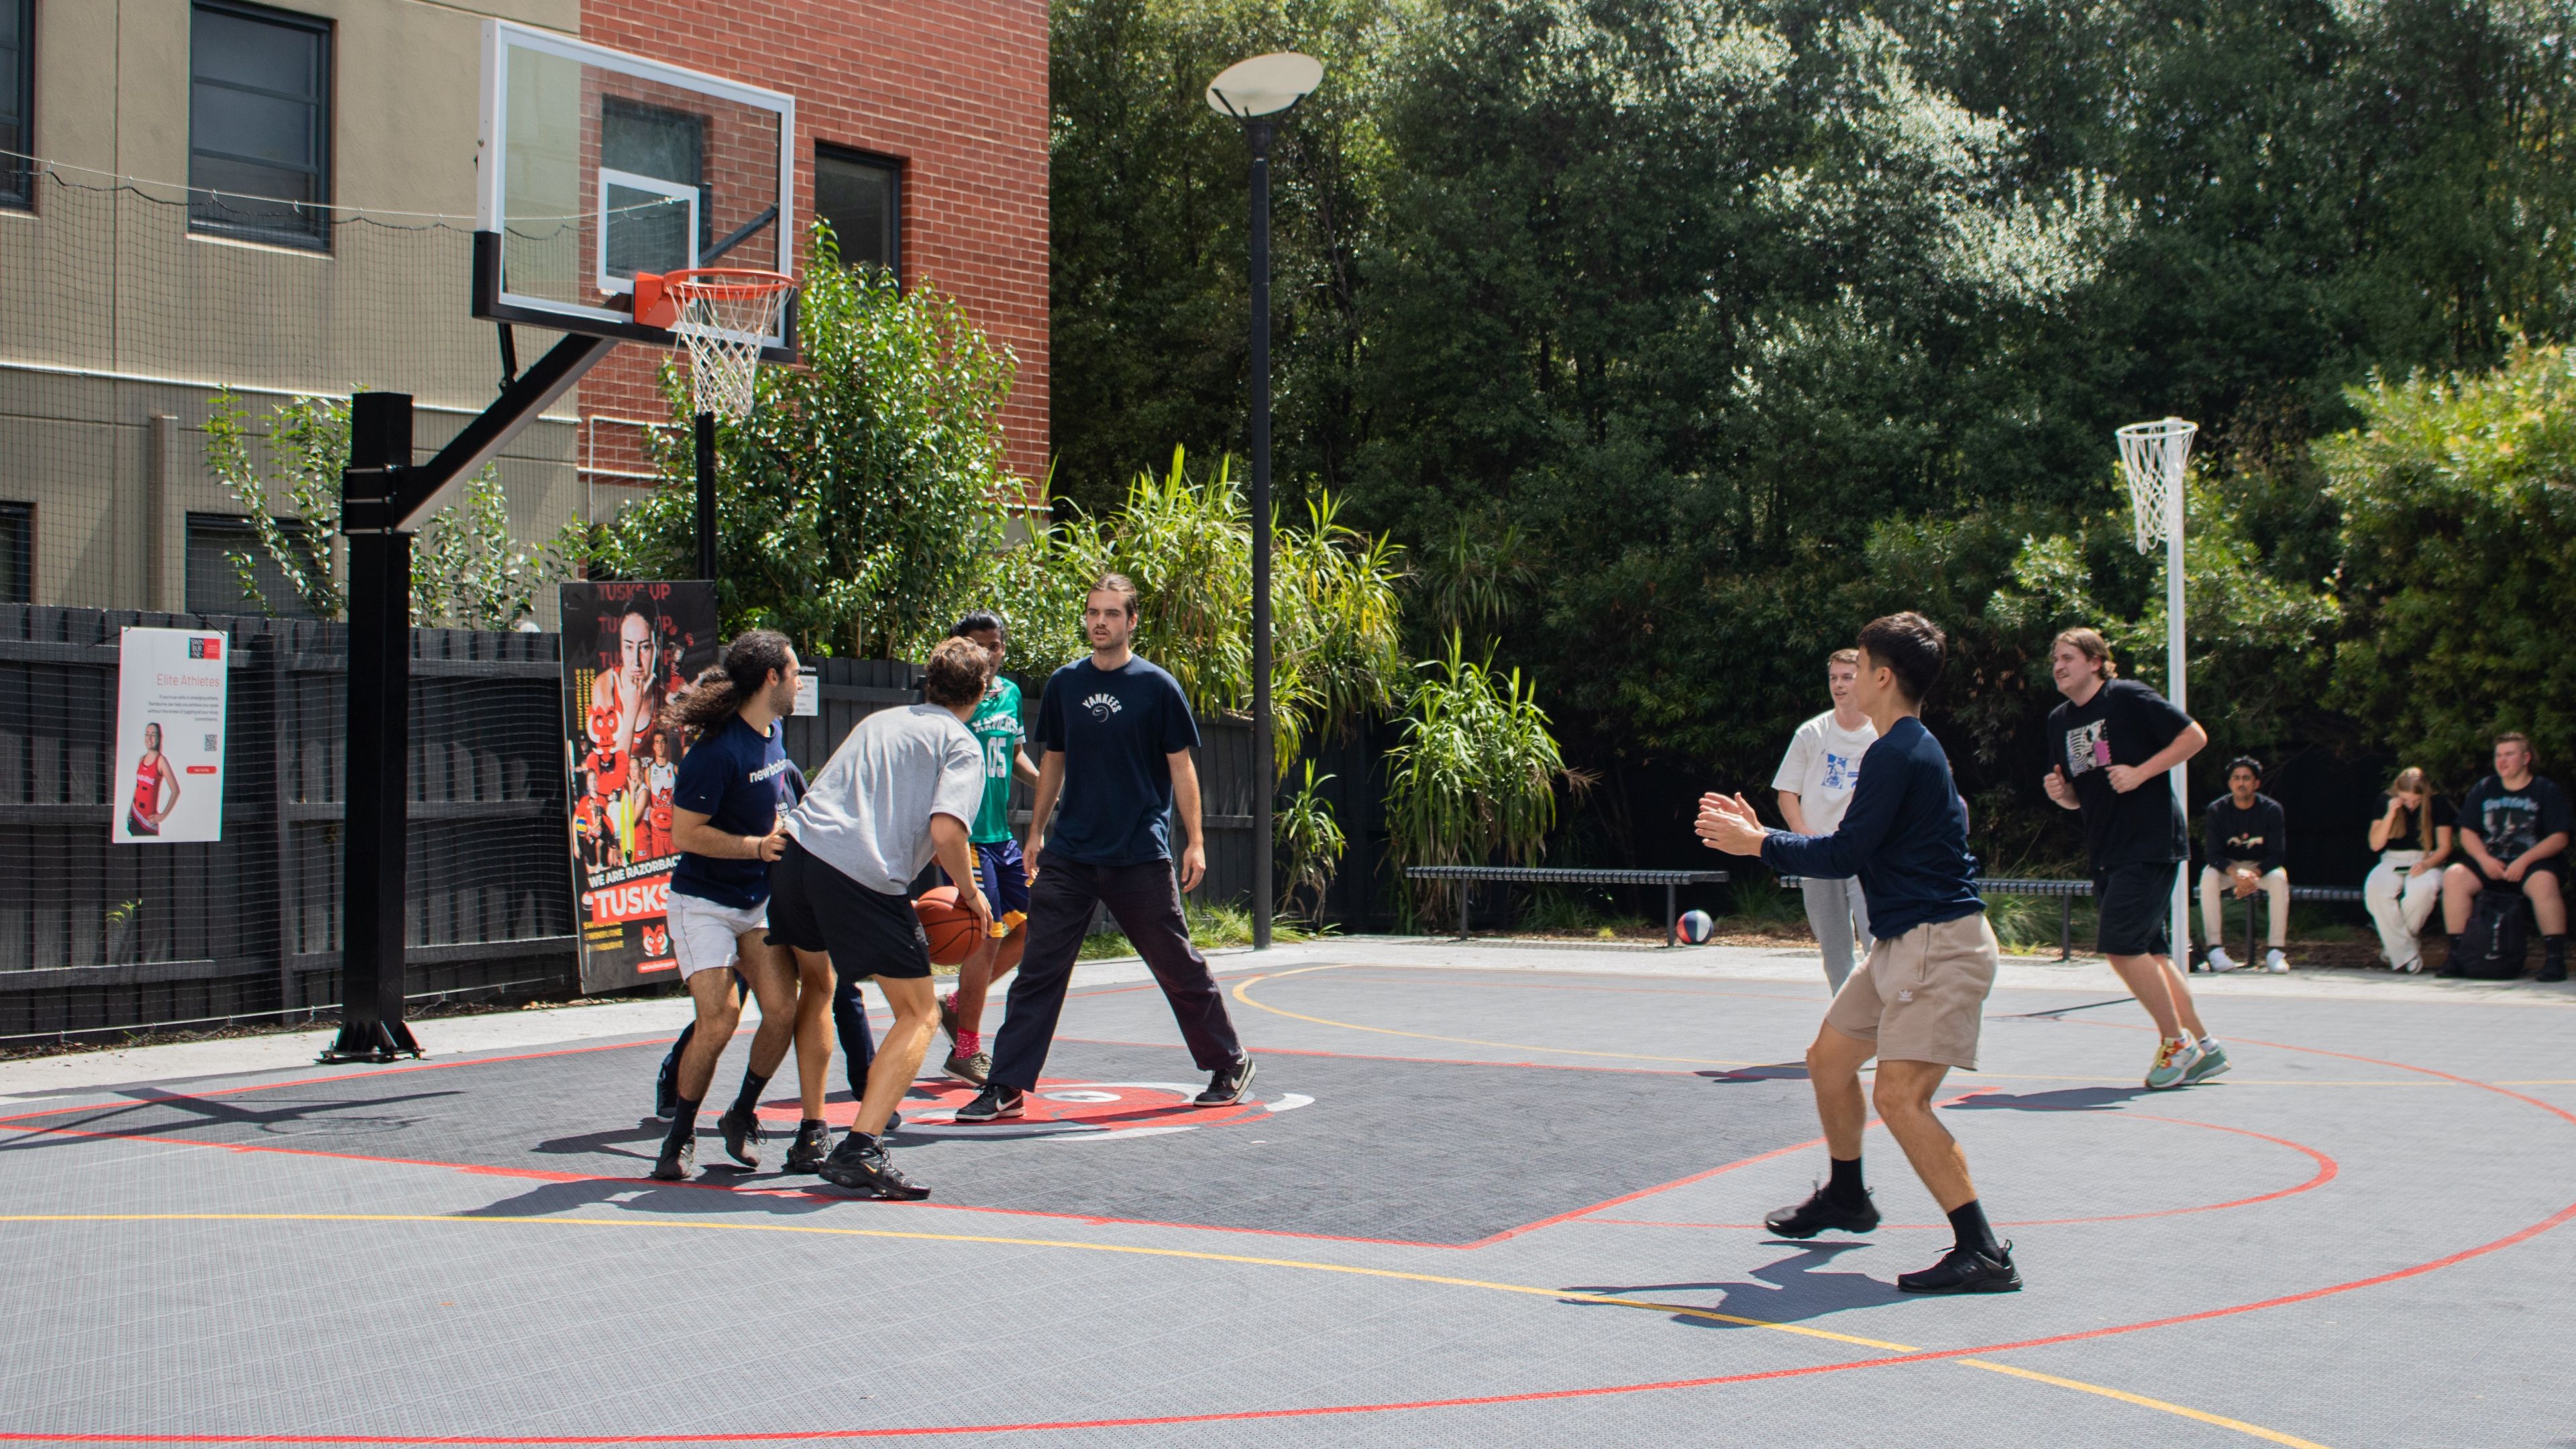 Students play basketball in the new half-court on Hawthorn campus